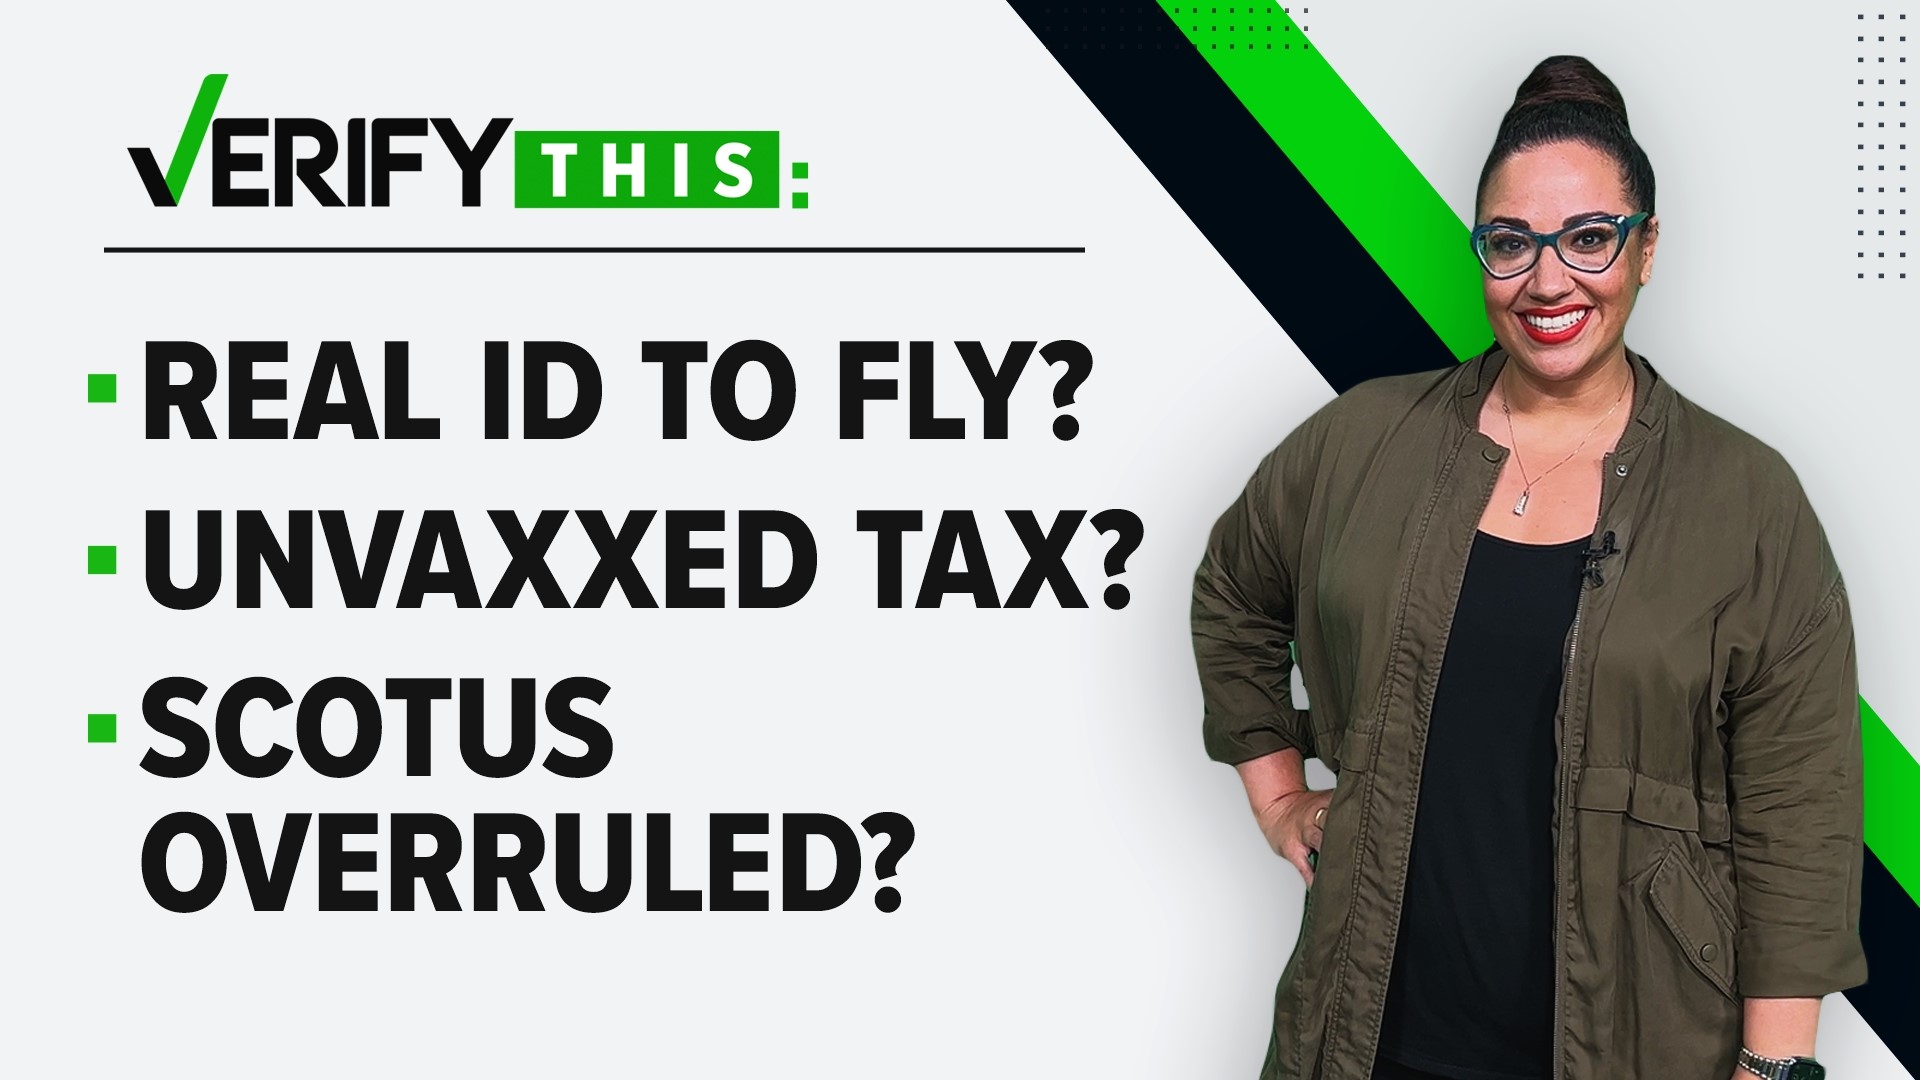 We verify claims on if the Supreme Court can be overruled, if you need a real ID to fly, a tax for the unvaxxed in Rhode Island, and more